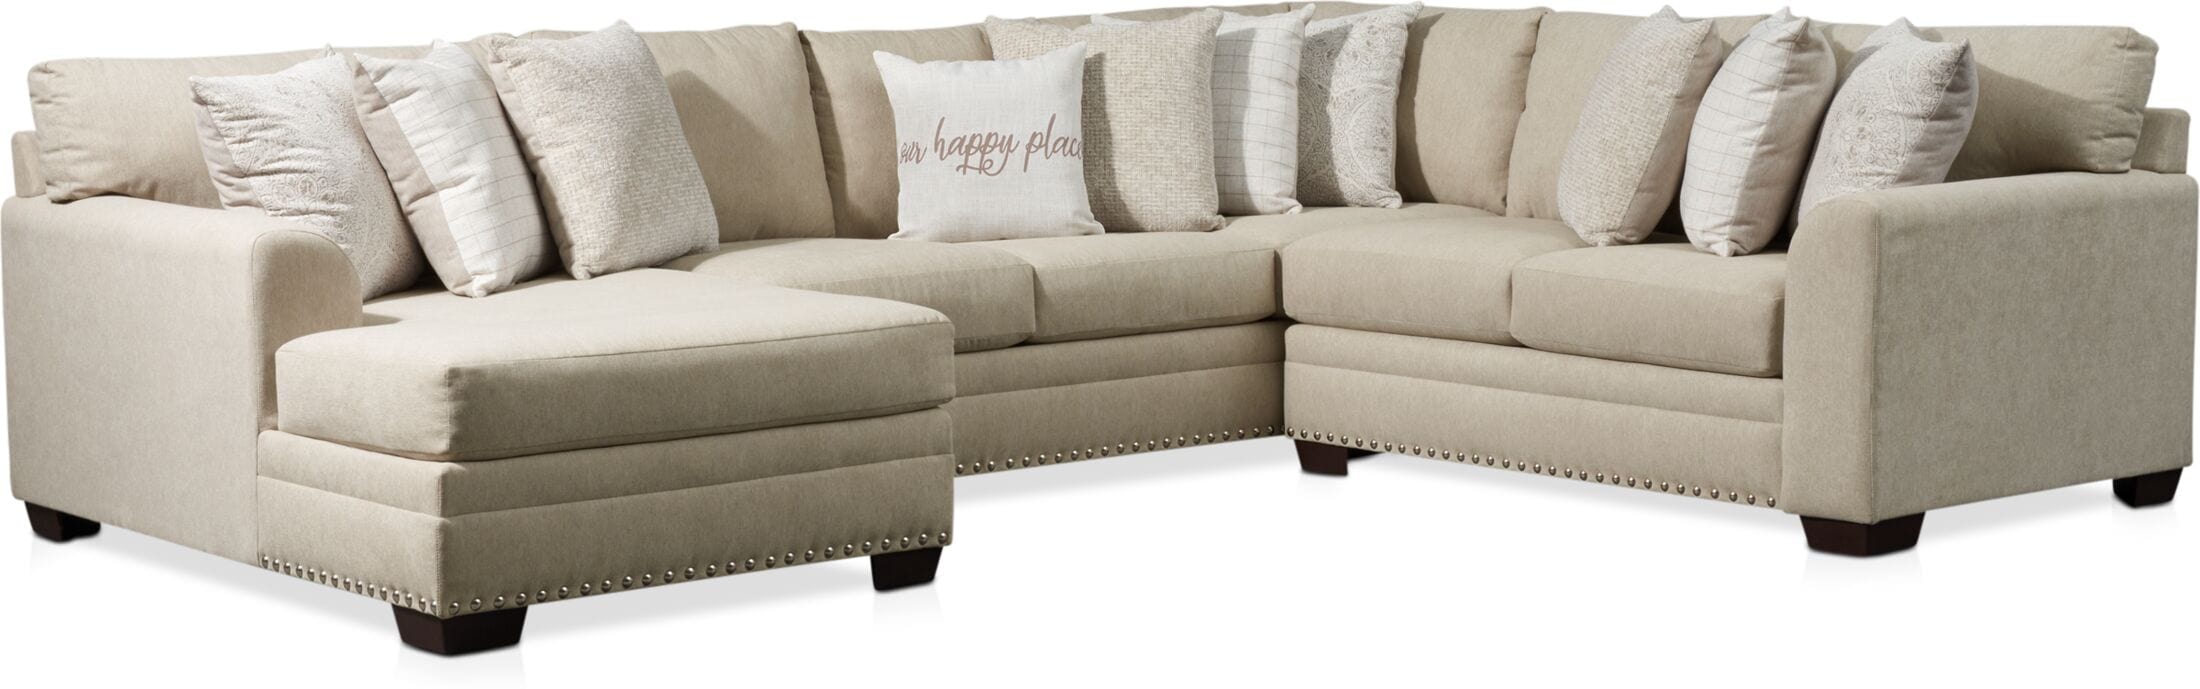 Bungalow 4-Piece Sectional